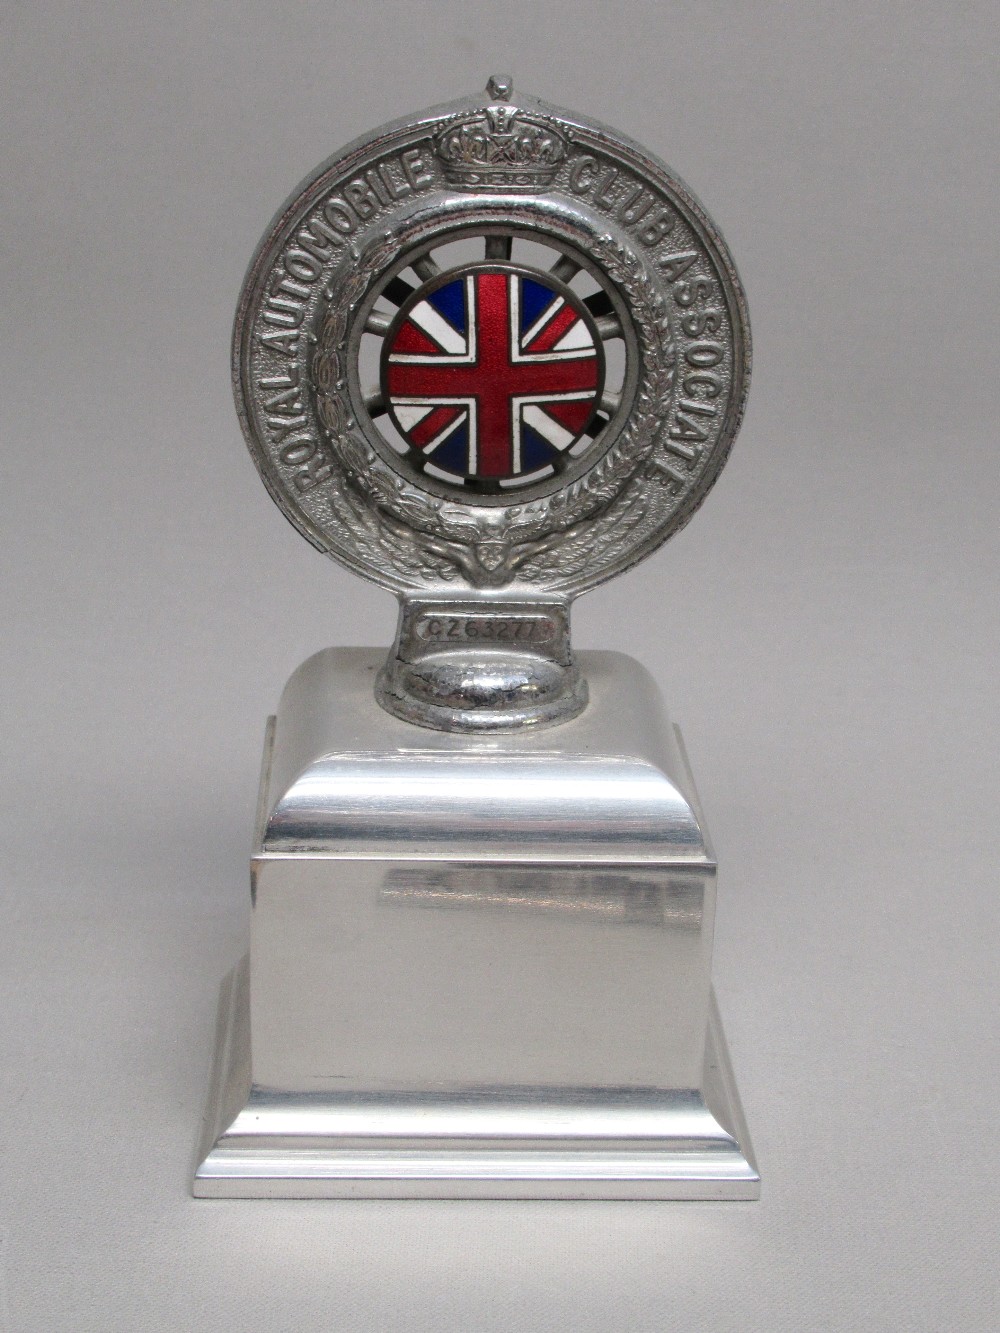 ROYAL AUTOMOBILE CLUB ASSOCIATION CHROMIUM PLATED AND ENAMELLED CAR BADGE No. CZ63277 CIRCA 1925, ON - Image 2 of 4